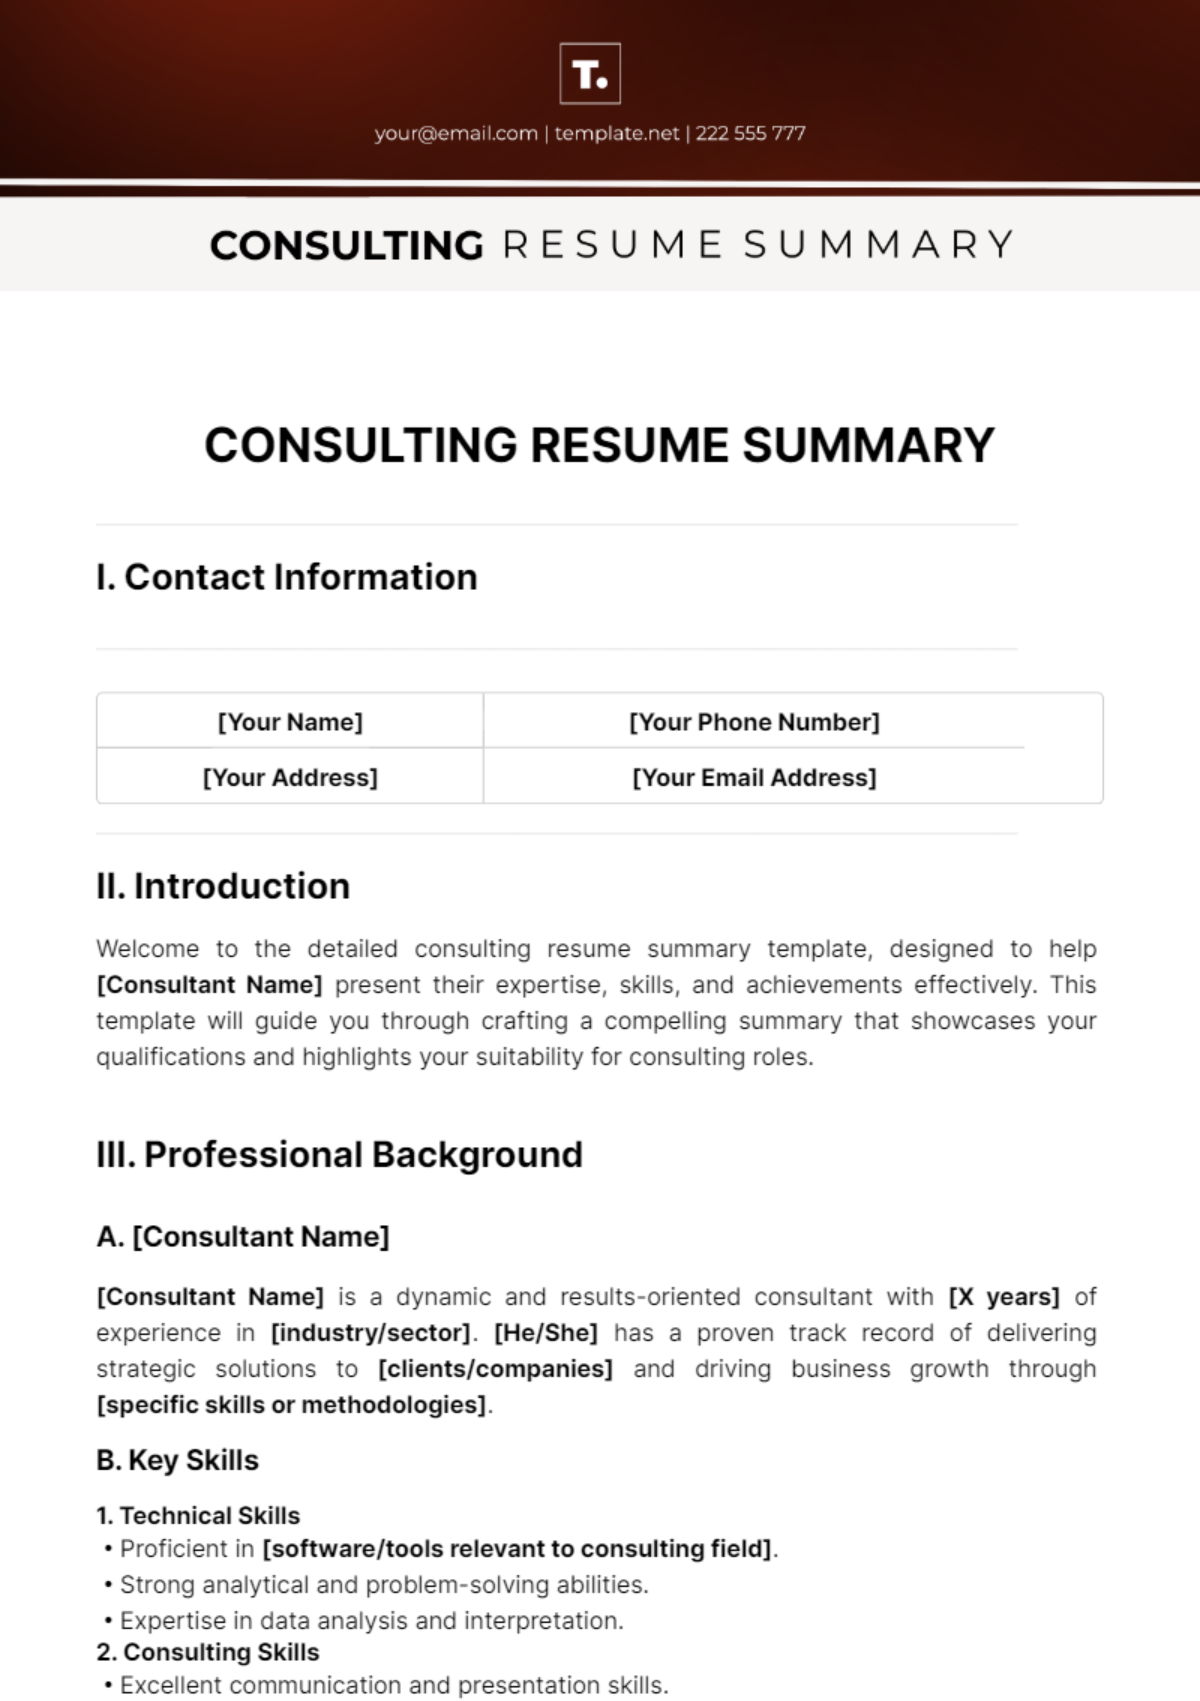 Consulting Resume Summary Template